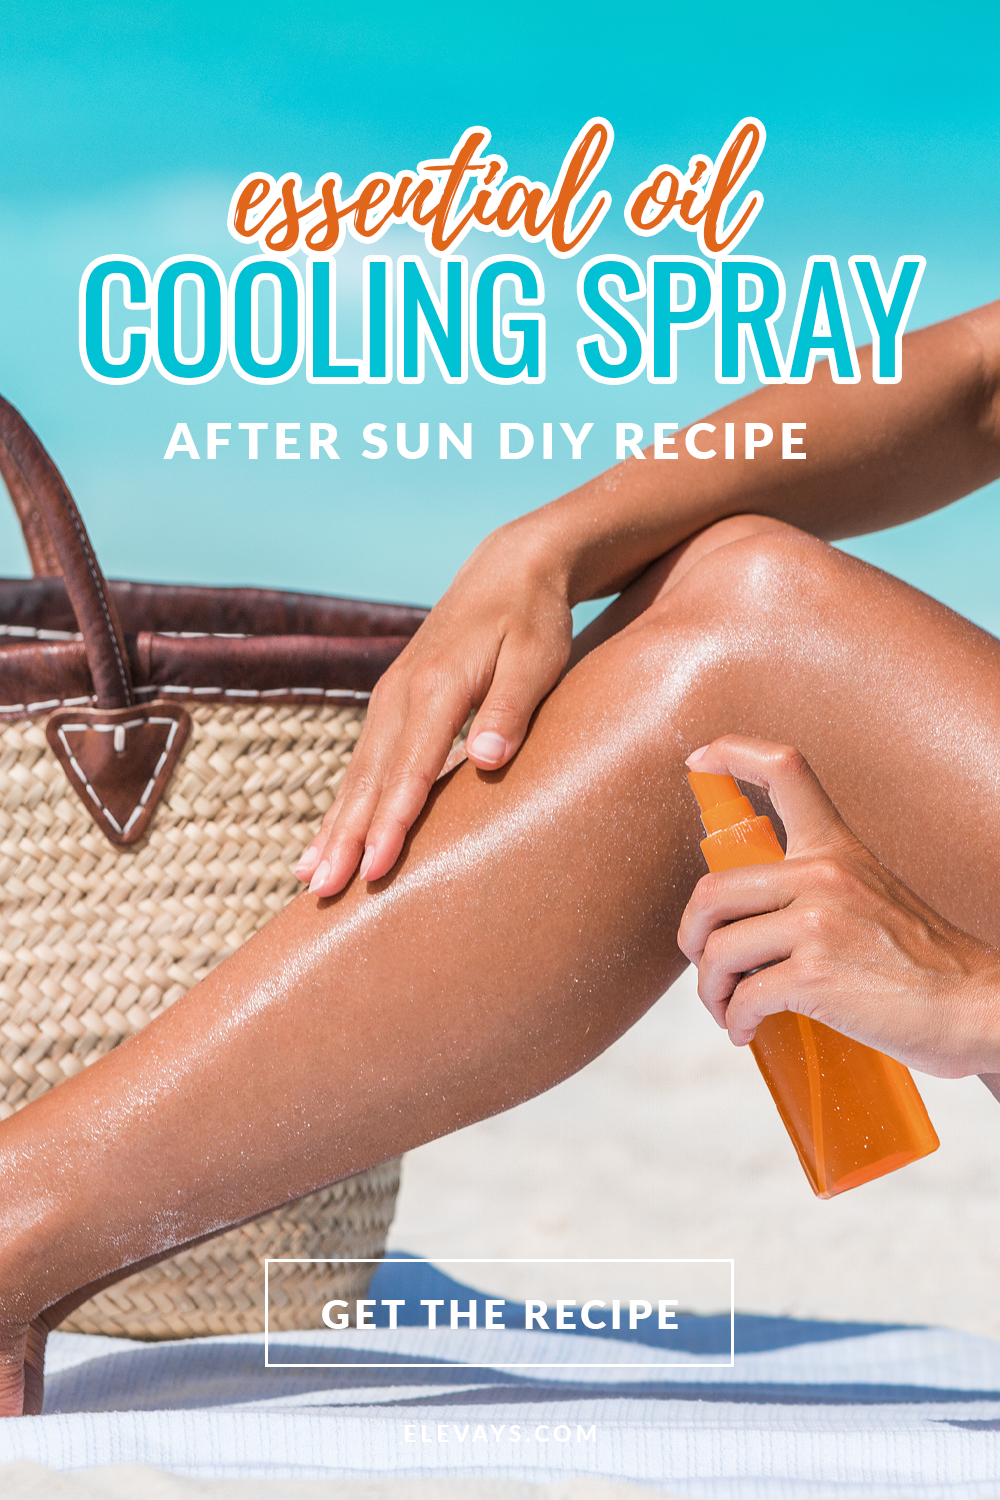 After Sun Cooling Spray DIY Oil Recipe - Make your Summer Awesome with Essential Oils